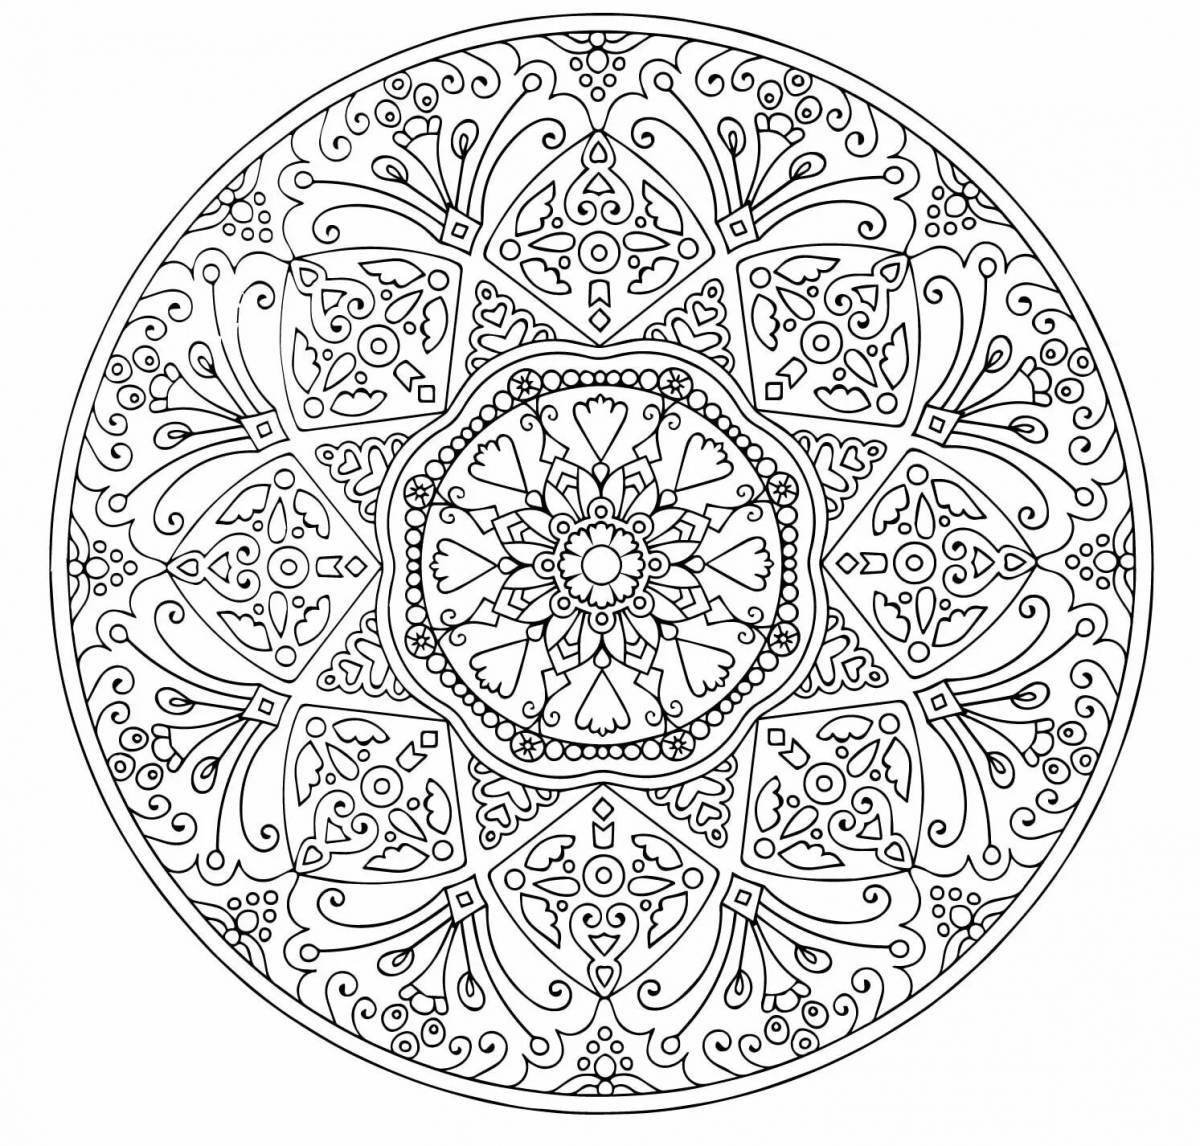 Majestic coloring mandala of peace and tranquility